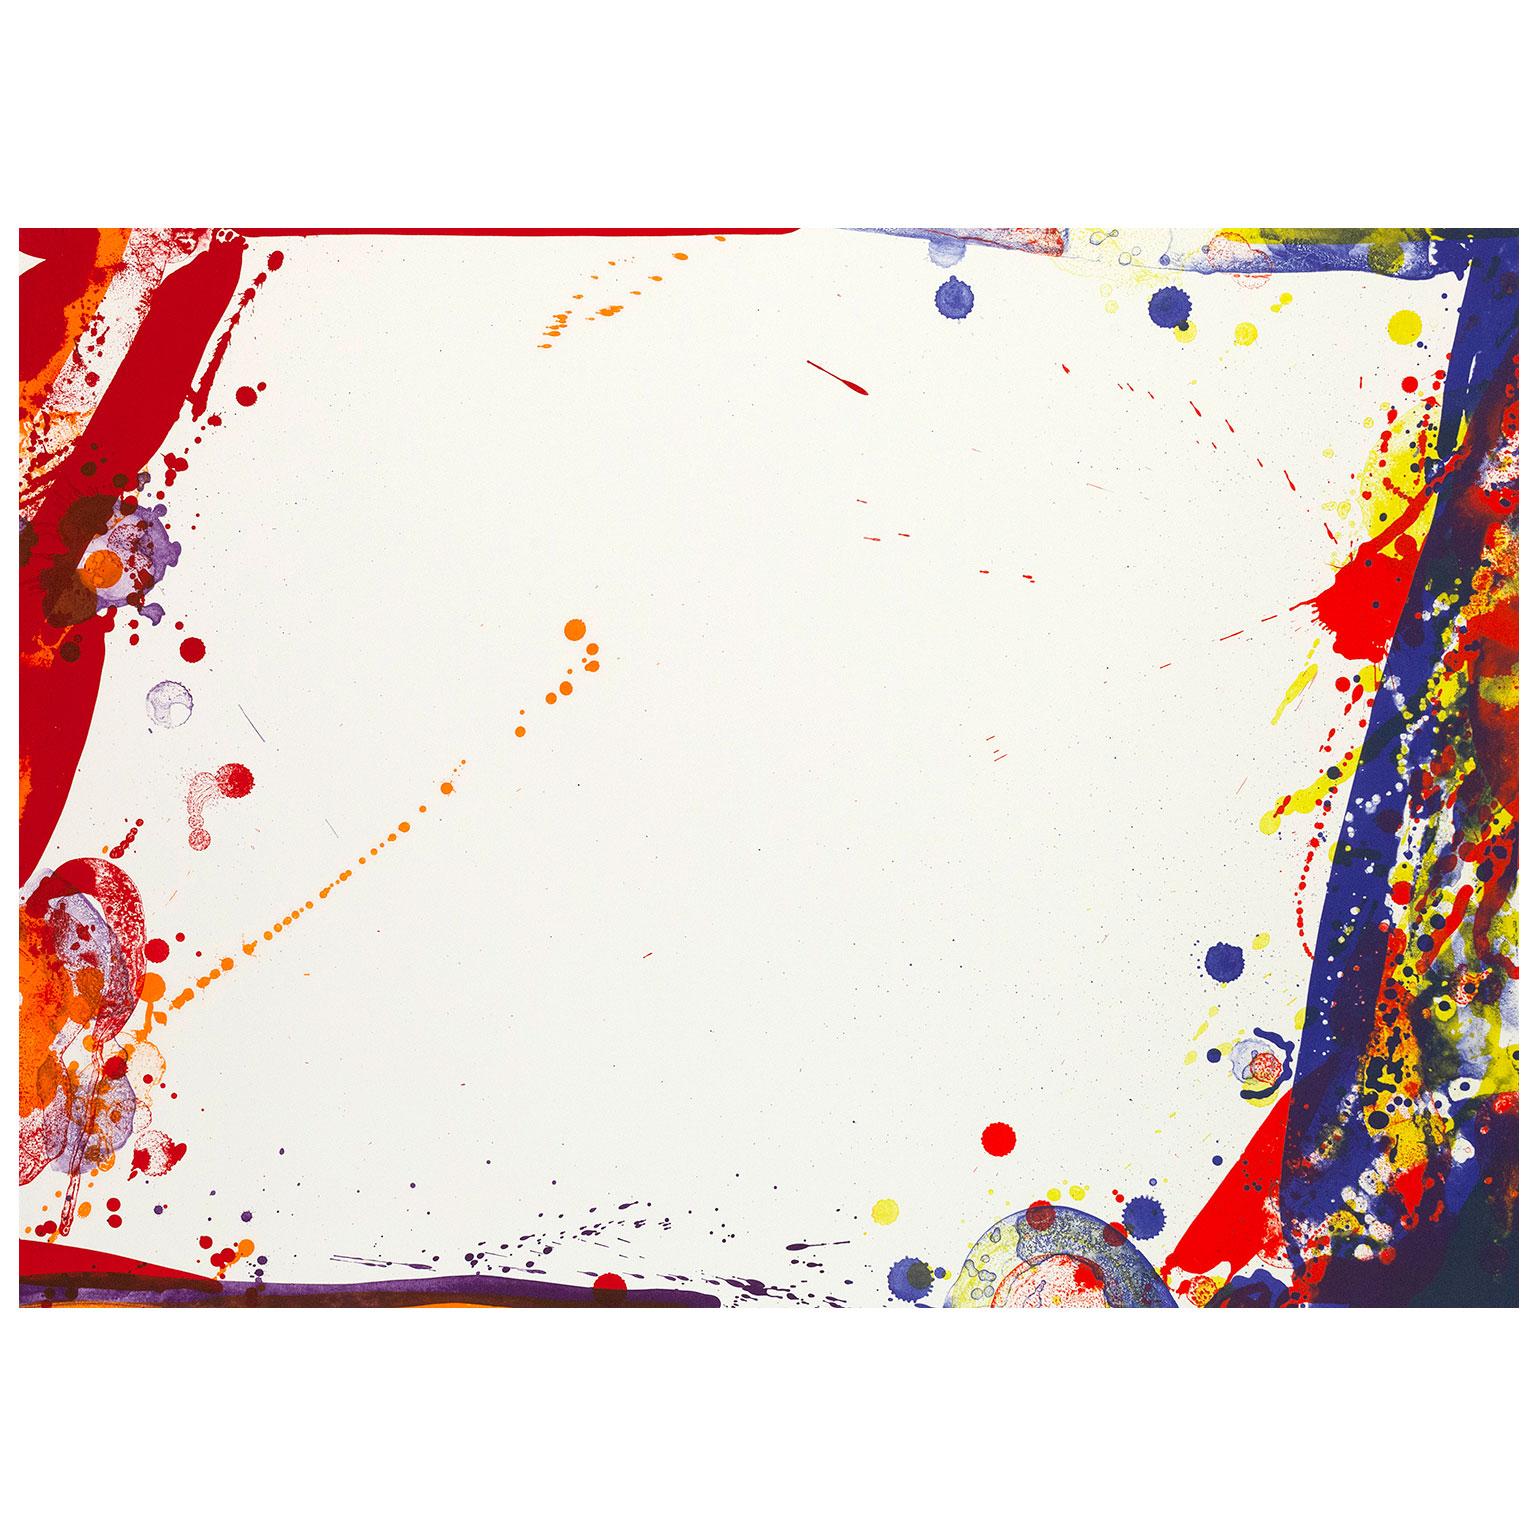 A preeminent figure in 20th century abstraction, Sam Francis (1923-1994) is renowned for his dynamic and colorful works. Printmaking was an essential part of his practice. Similar to Robert Motherwell, Francis became so transfixed by the potential